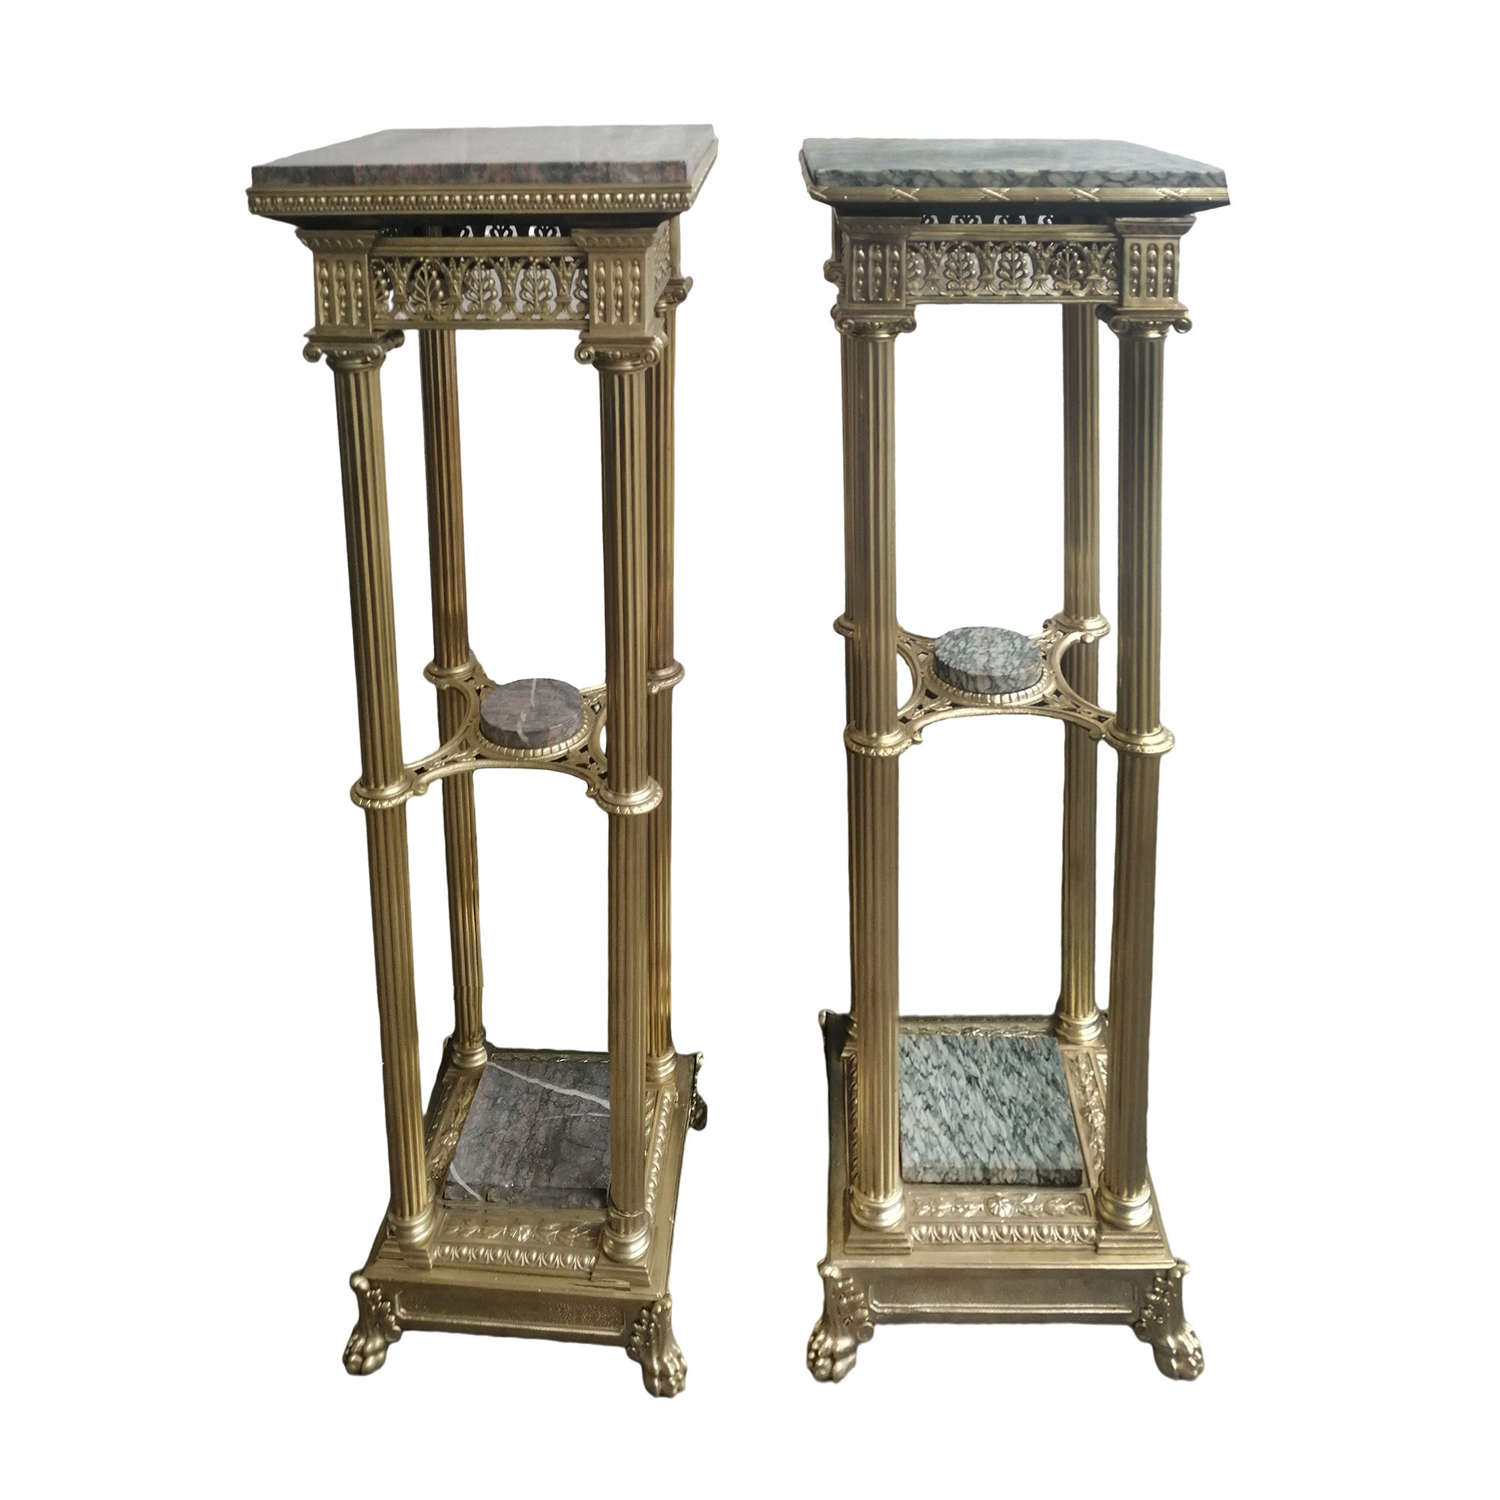 A fine quality matched pair of French 3 tier stands